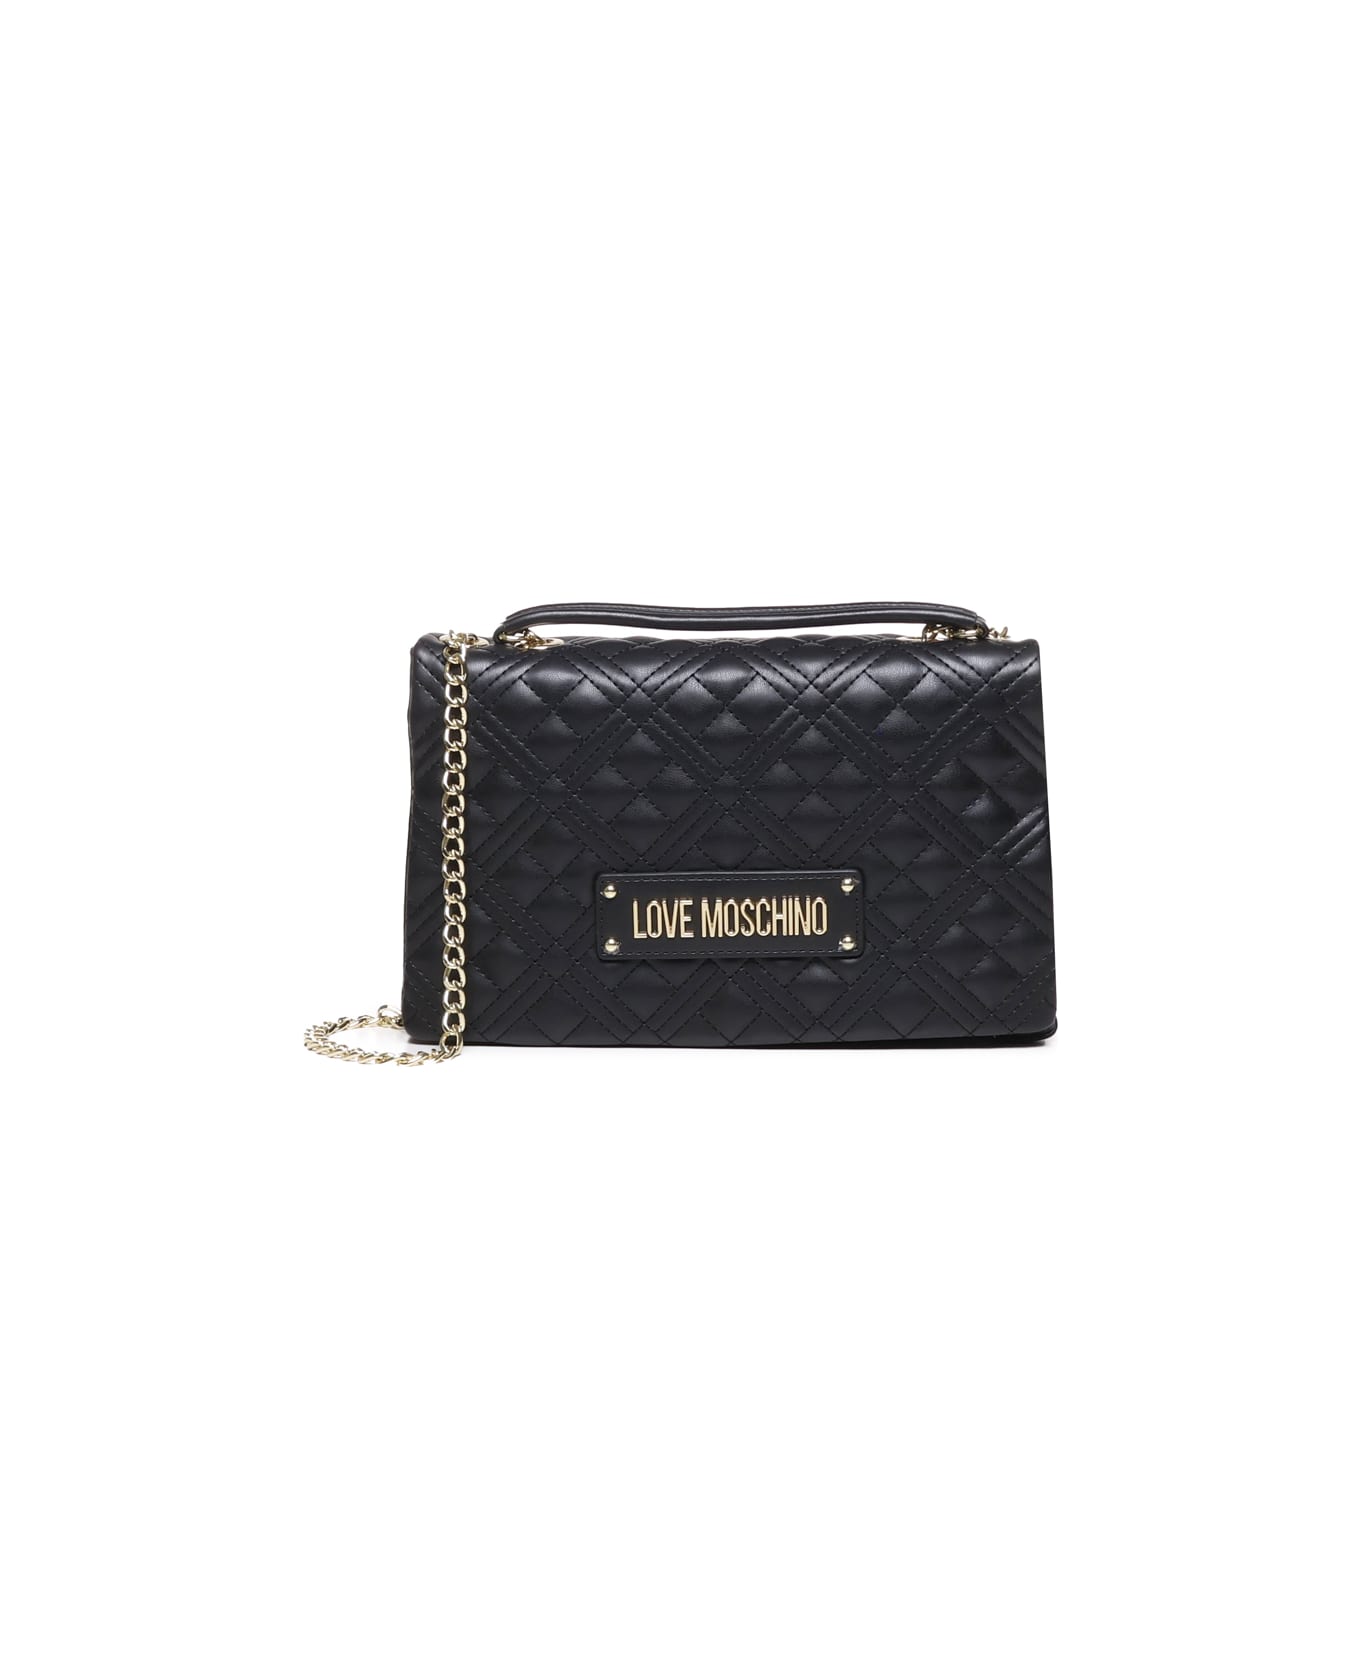 Love Moschino Bag With Shoulder Strap With Logo - Black ショルダーバッグ